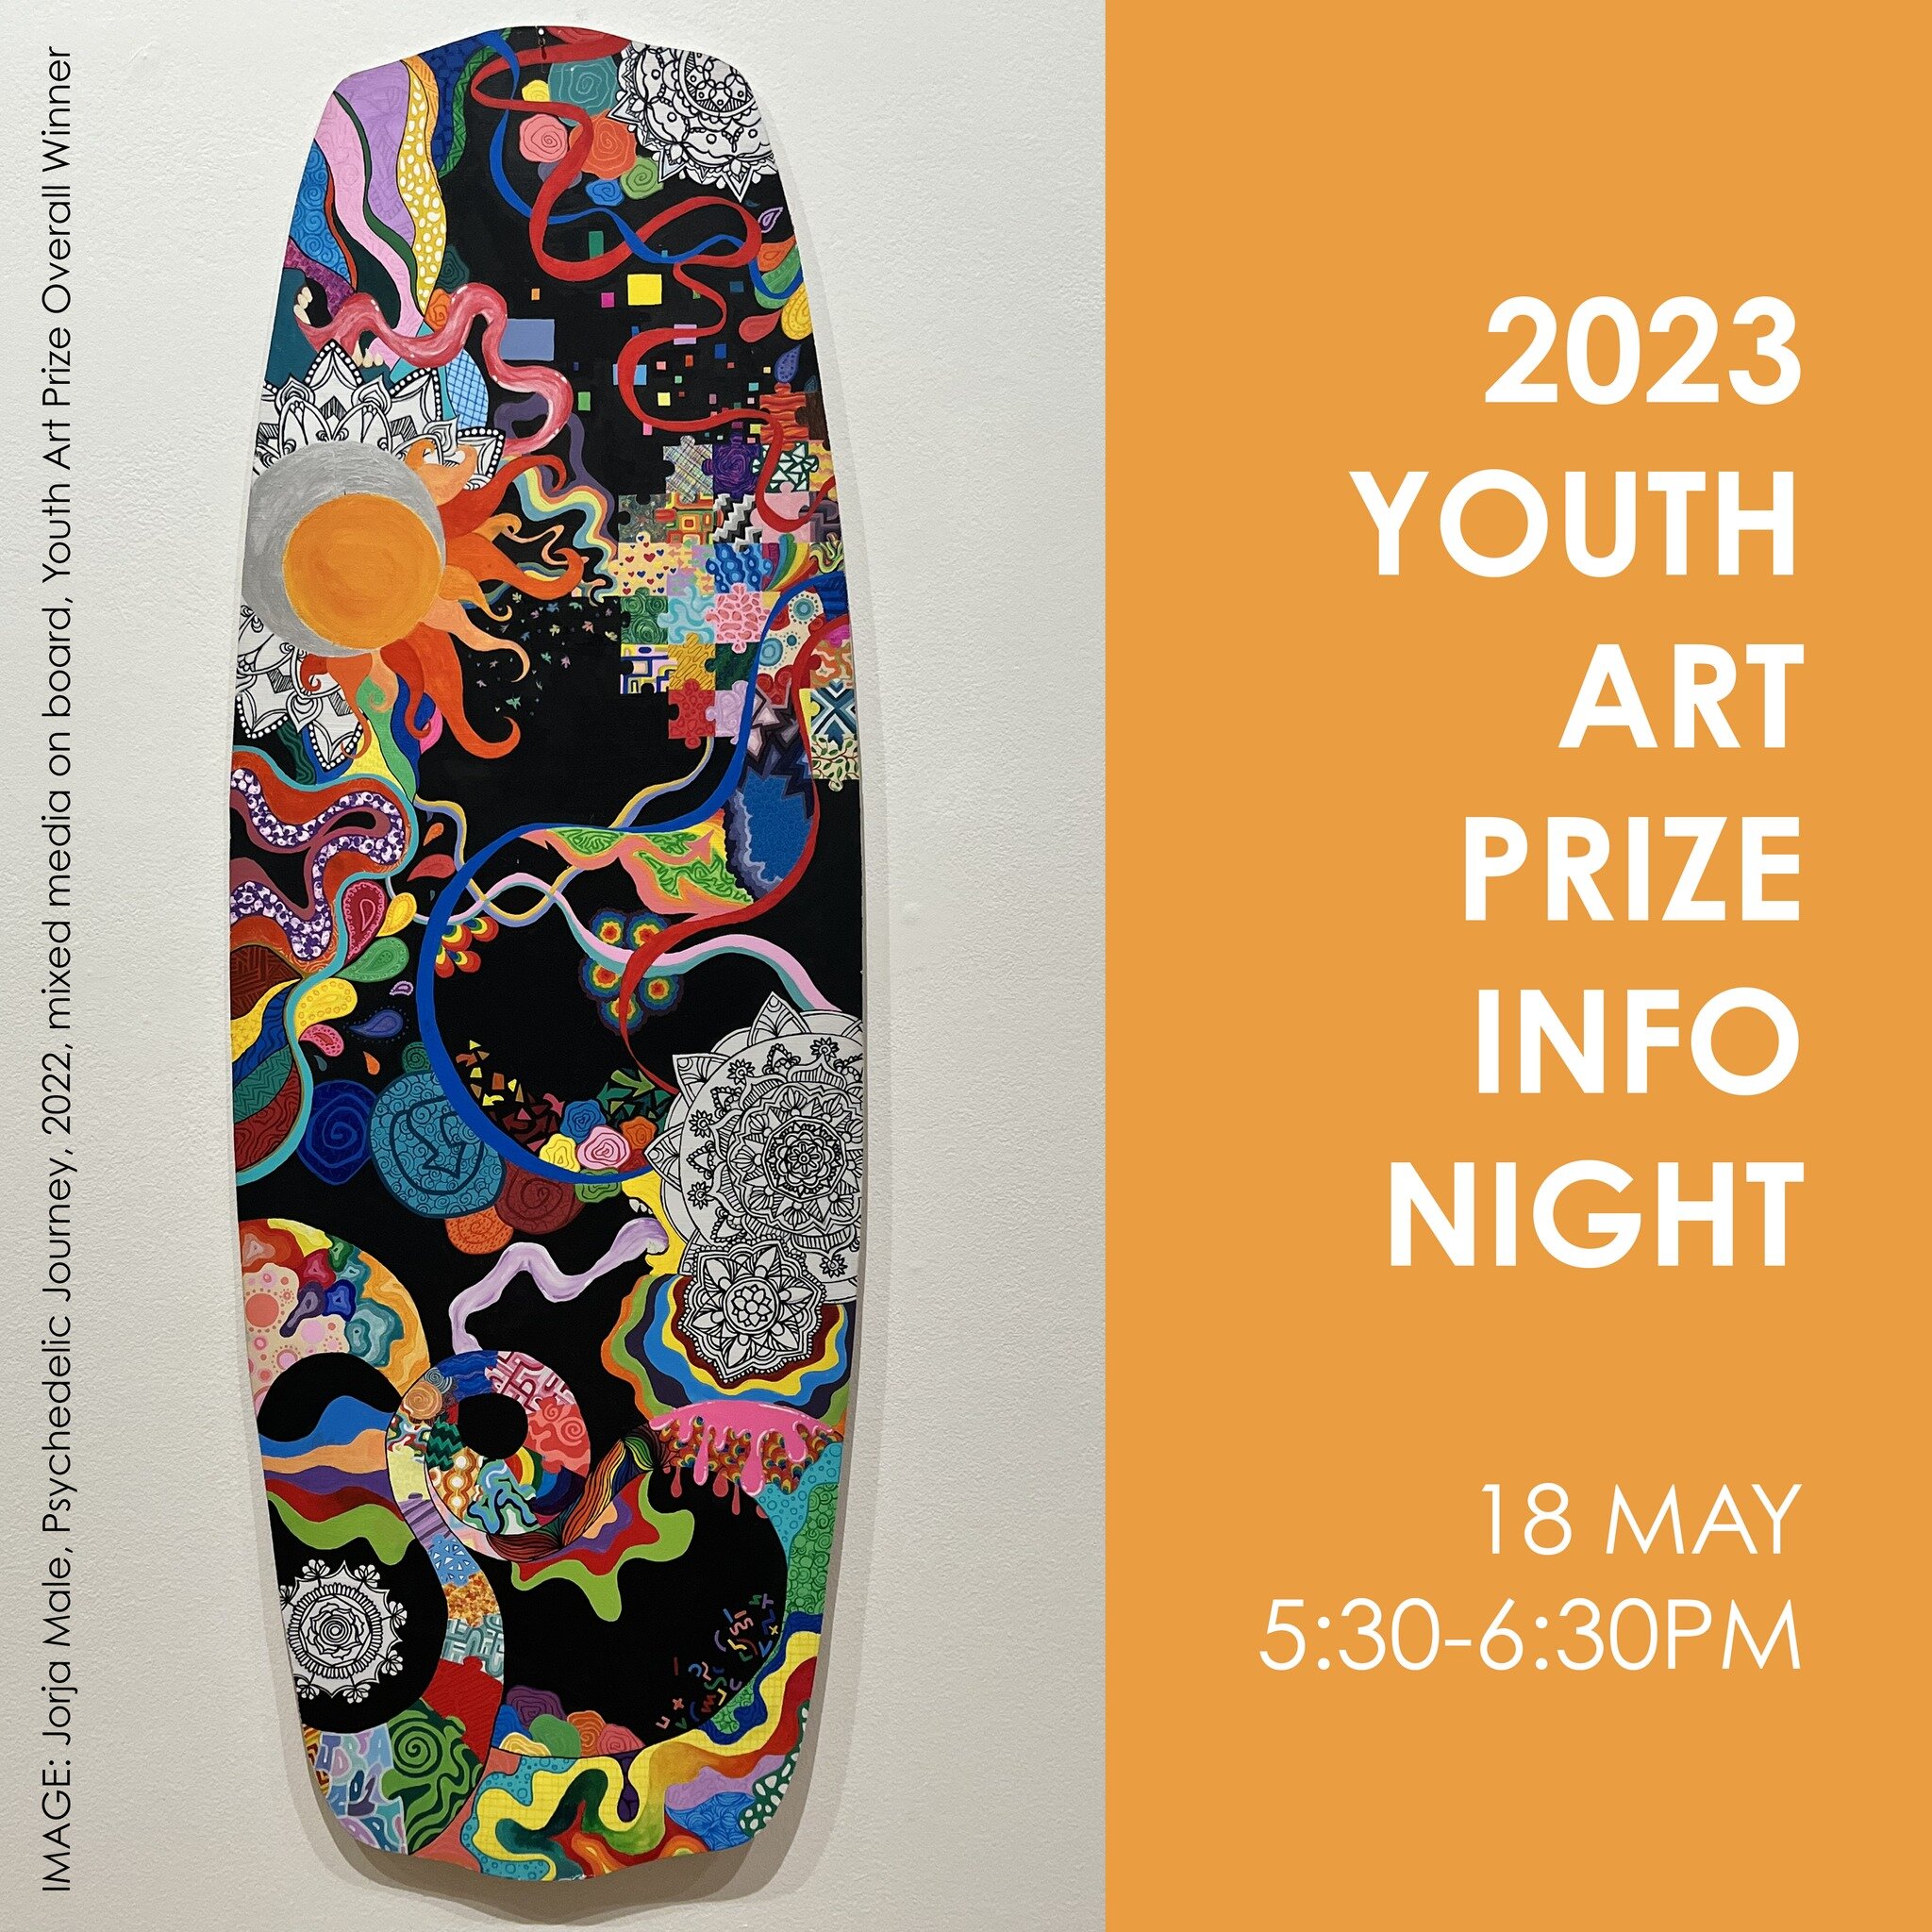 Looking for some support to enter the 2023 Youth Art Prize? Young Creatives 12 - 25 this opportunity is for you.

Youth Art Prize Info Night, Thursday 18th of May Register for a FREE ticket - link in bio

#youthartprize #MurrayBridgeRegionalGallery #